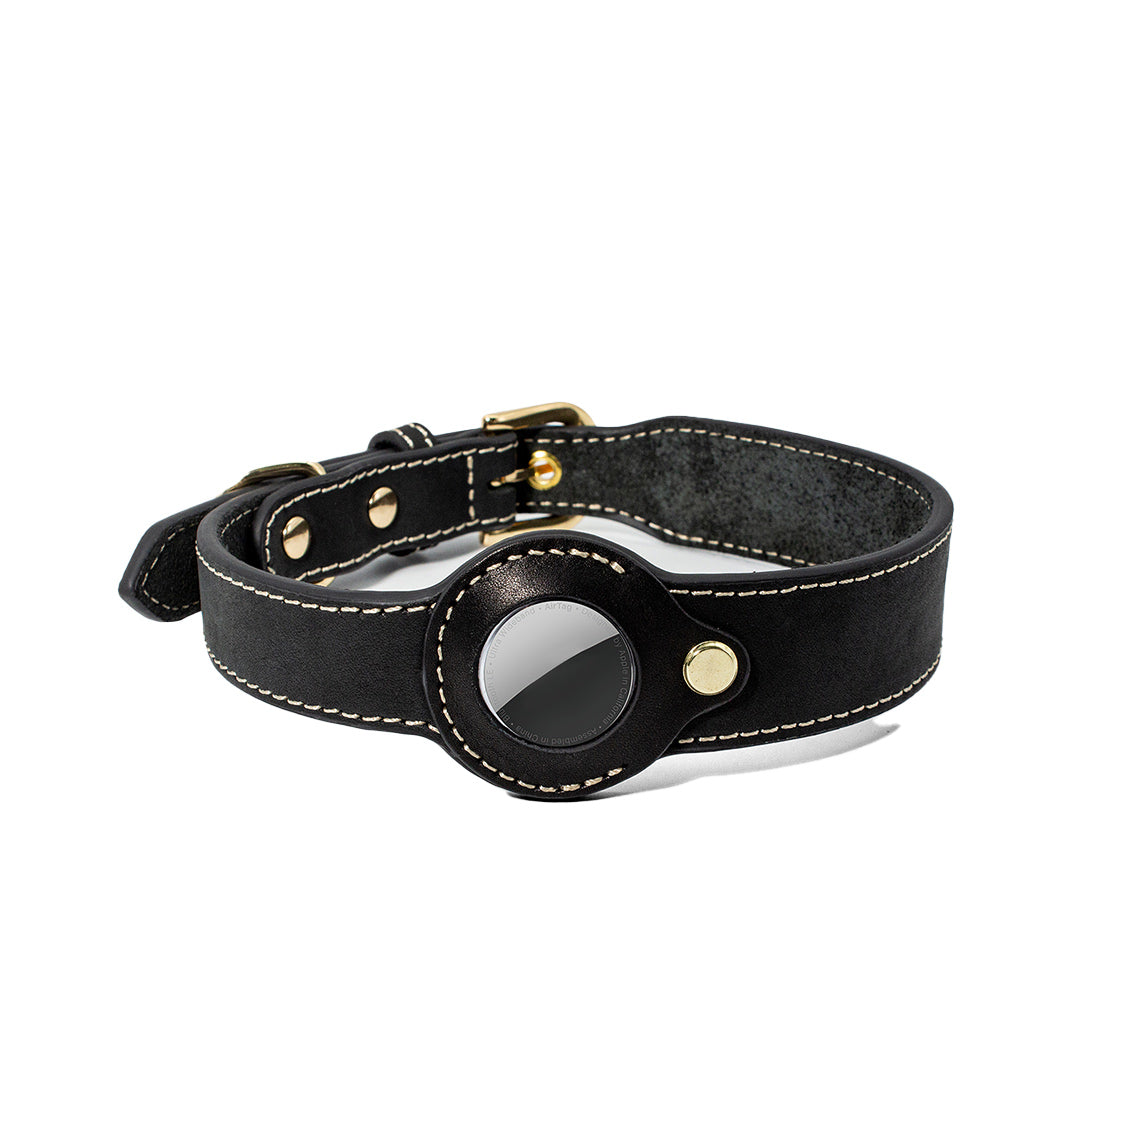 Genuine Leather Dog Collar with Airtag Case - Black